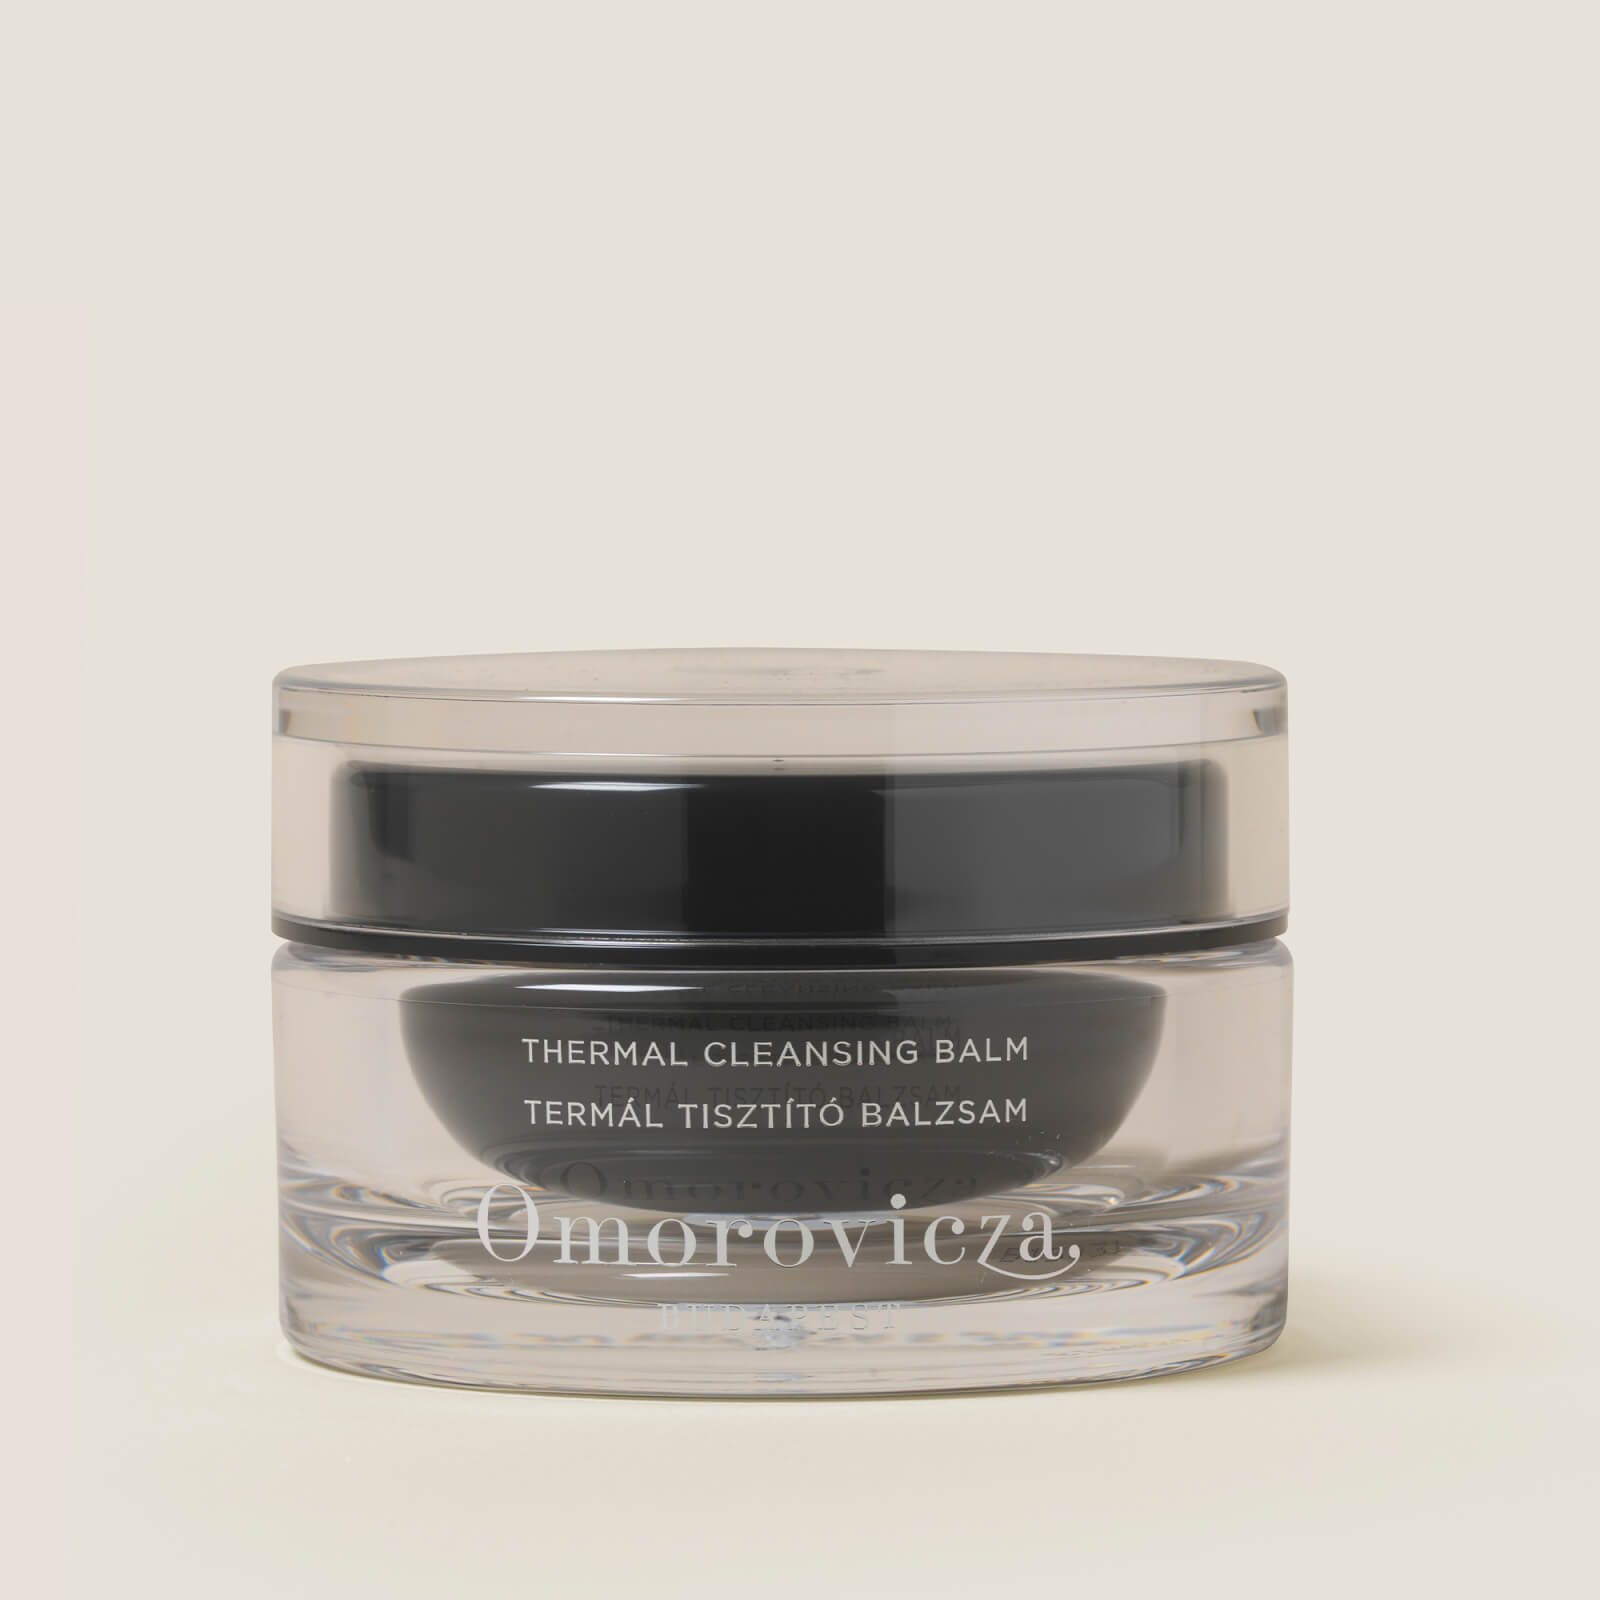 Omorovicza Thermal Cleansing Balm Supersize -100ml  (Worth PS92.00)